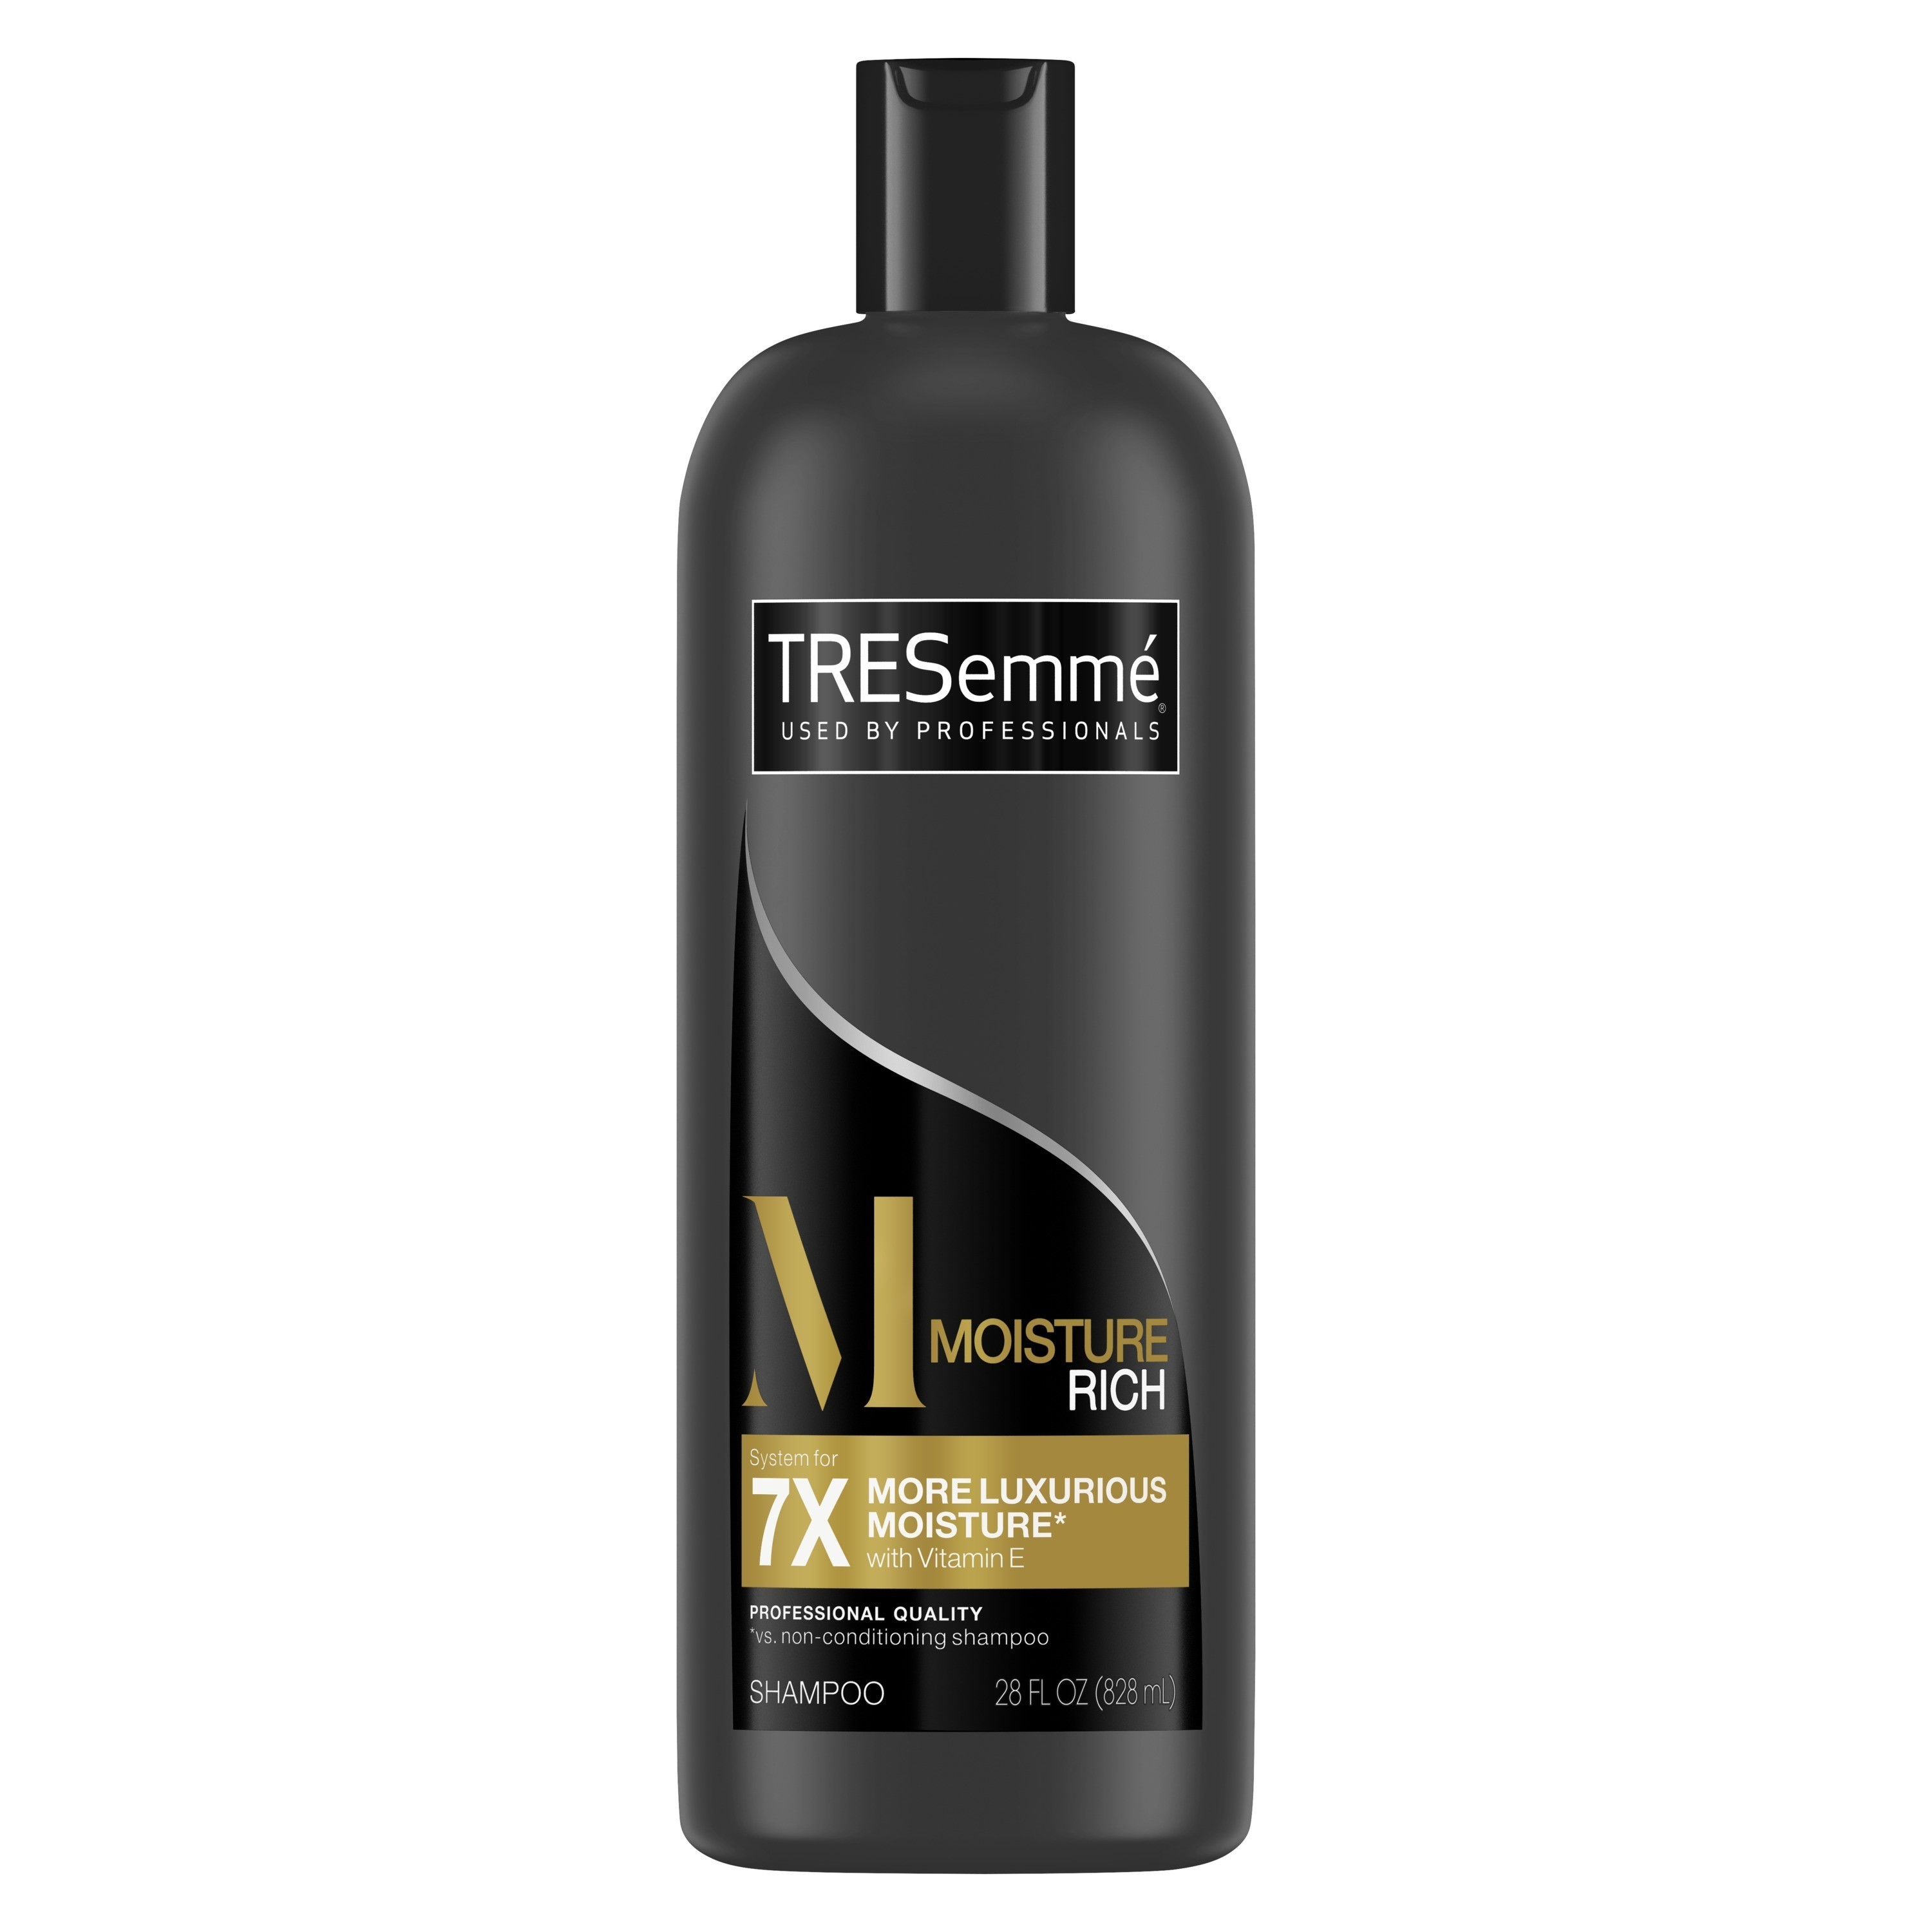 ($13 Value) TRESemme 3-Piece Moisture Rich Gift Set with Shampoo, Conditioner, and All-In-One Styling Spray - image 7 of 10